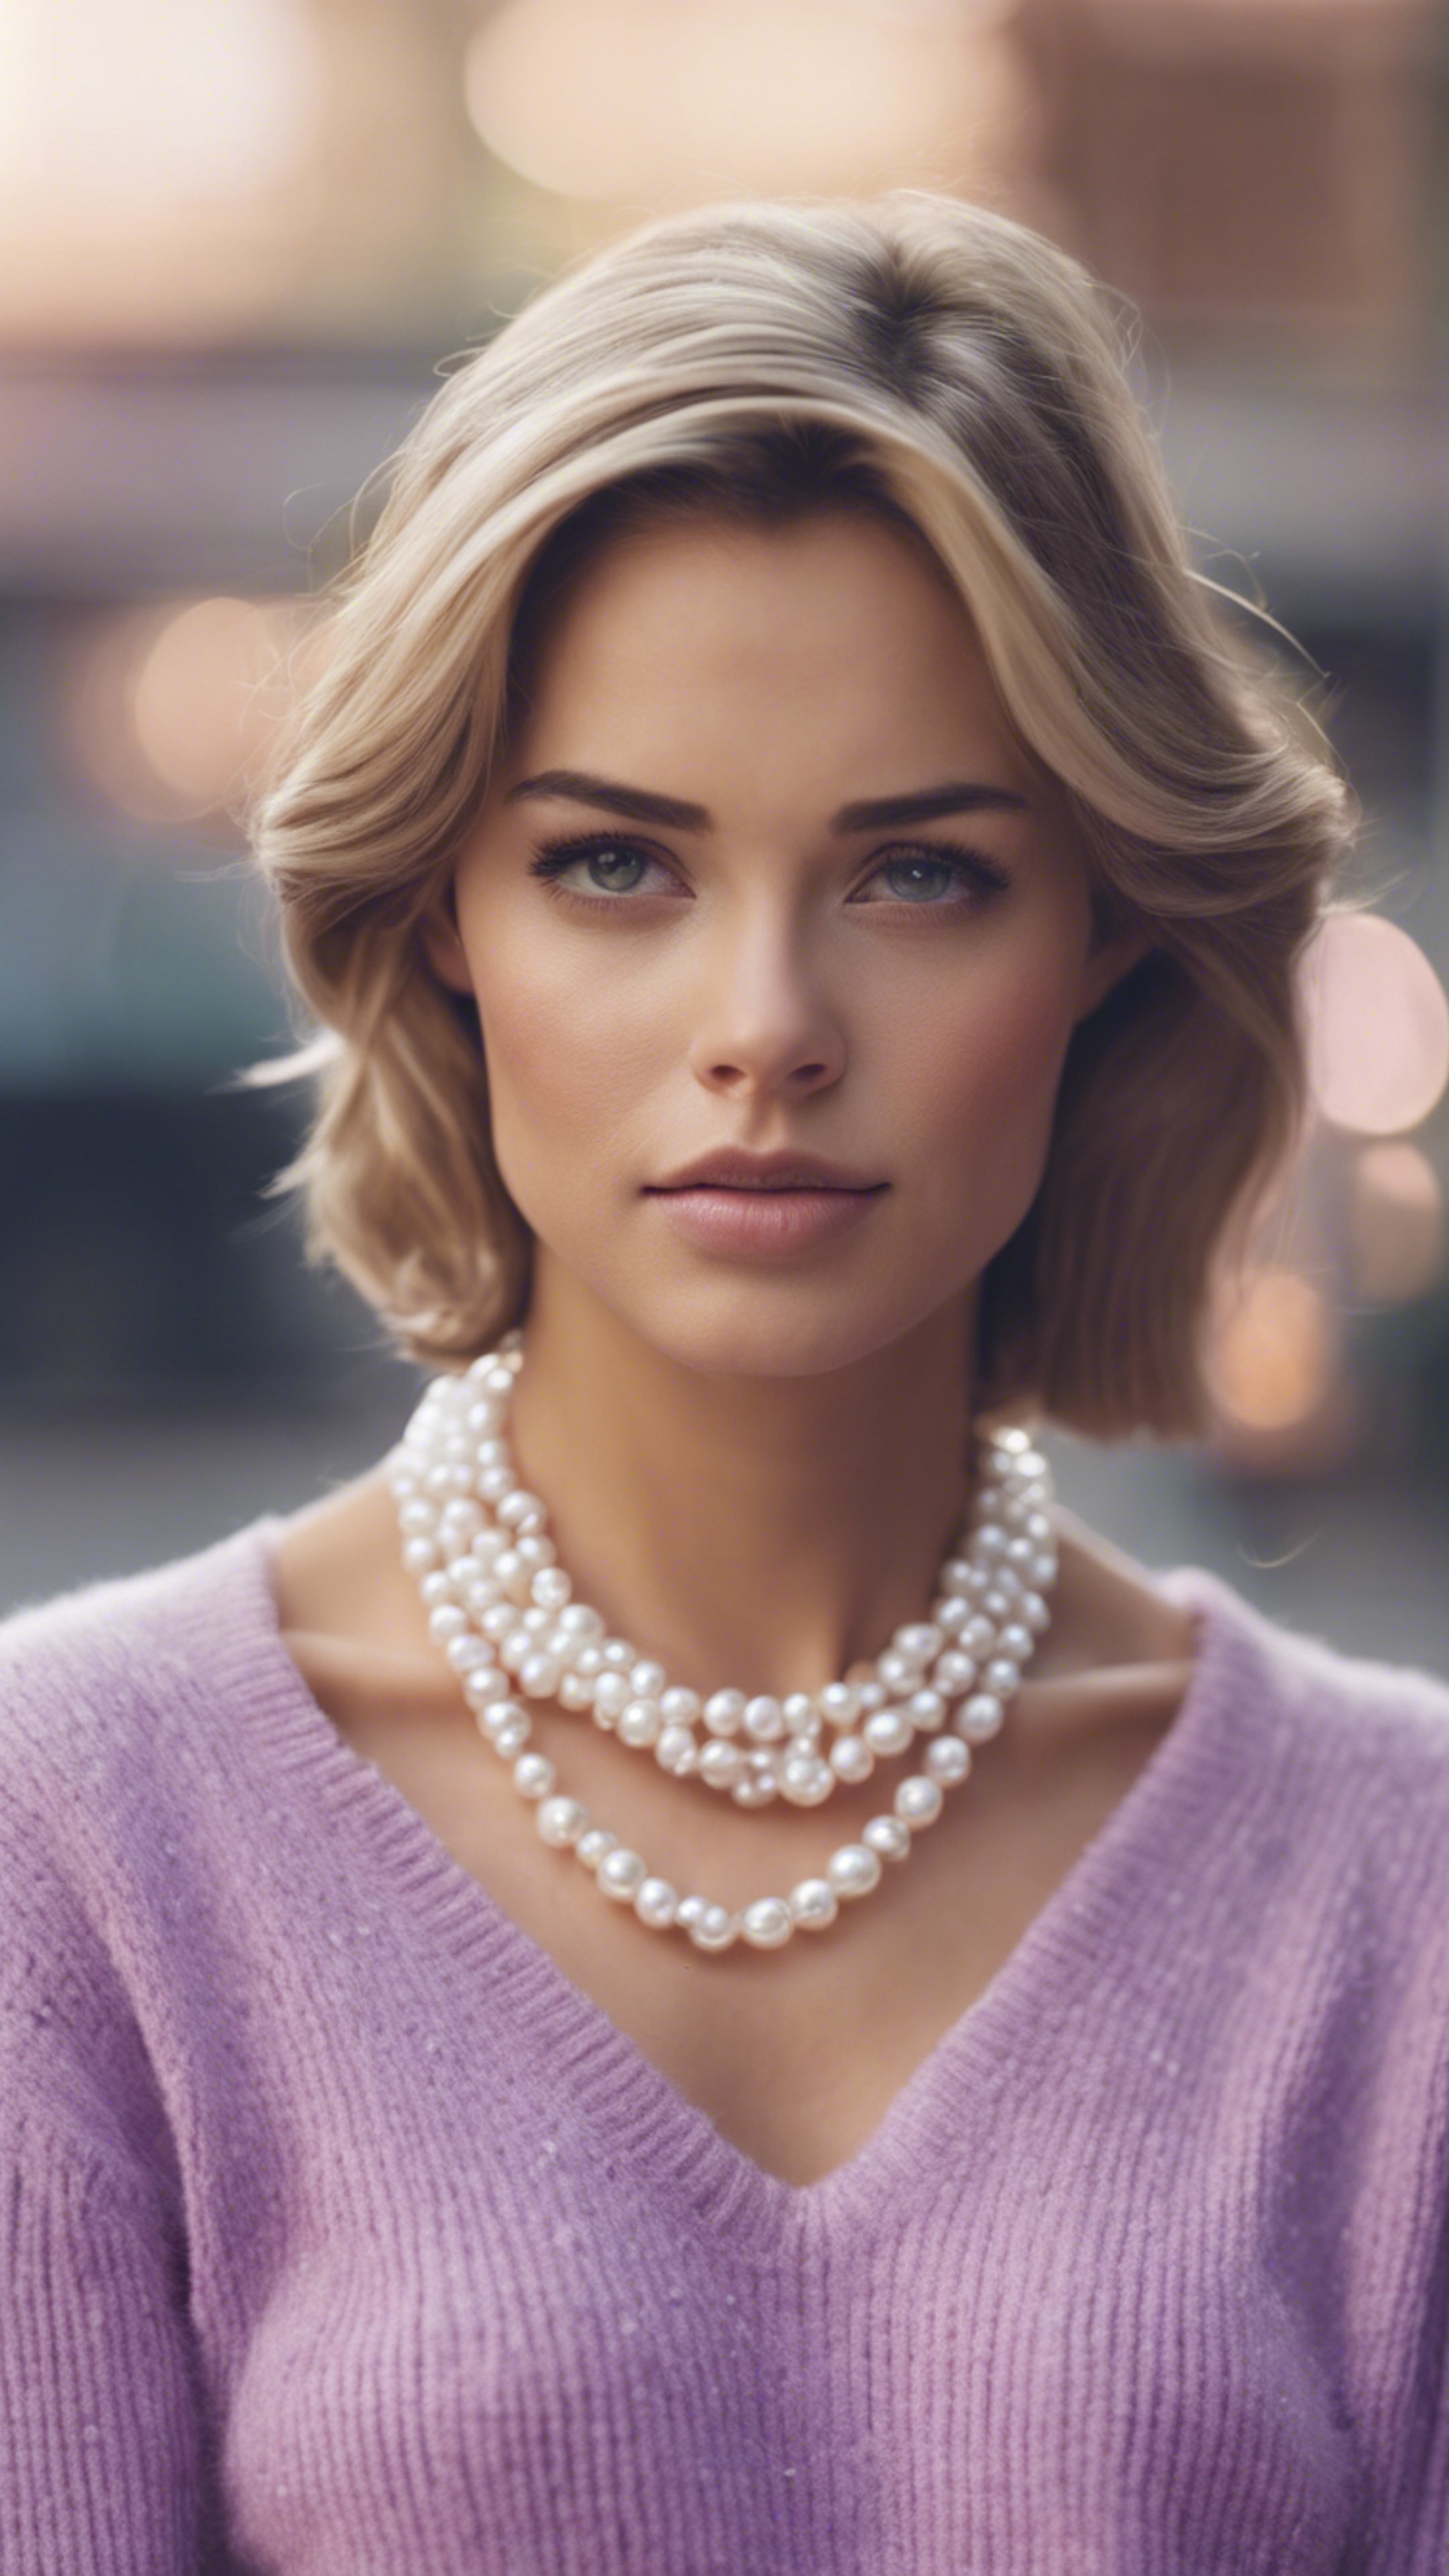 A stylish preppy woman wearing a pastel purple cashmere sweater and pearl necklace.壁紙[eff5c75e56ed424daf90]